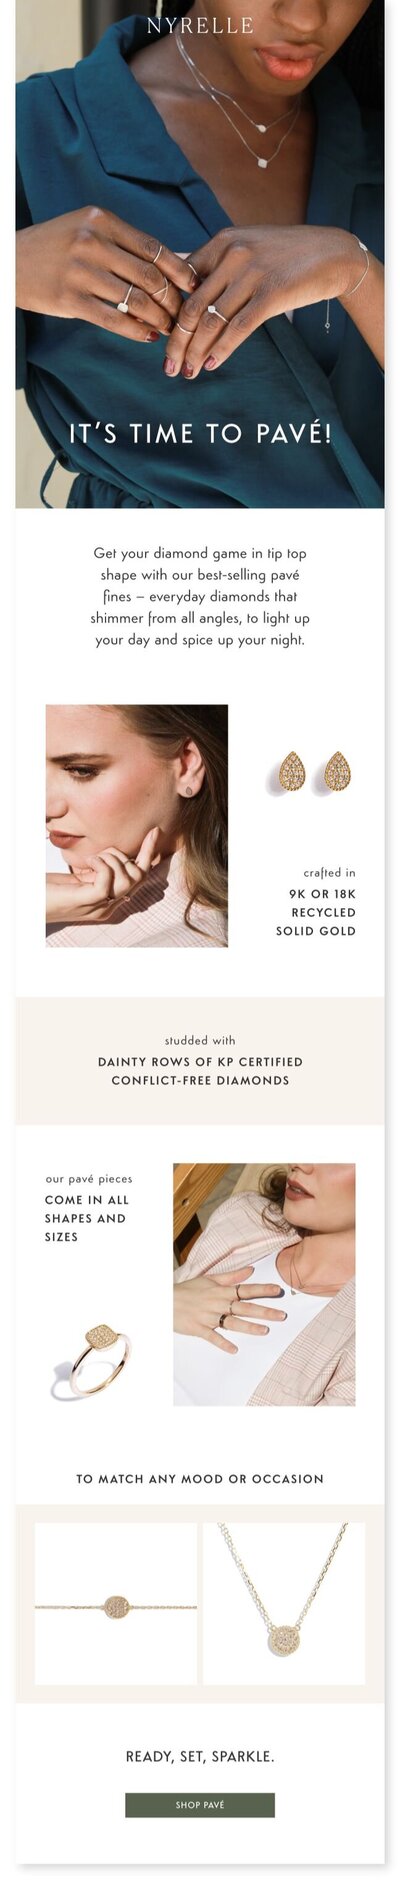 E-Commerce Graphic Design and Email Marketing Services in Hong Kong for Fashion and Jewelry Brands by Kyra Janelle – eDM Campaign for NYRELLE on Luxury Diamond Jewelry.